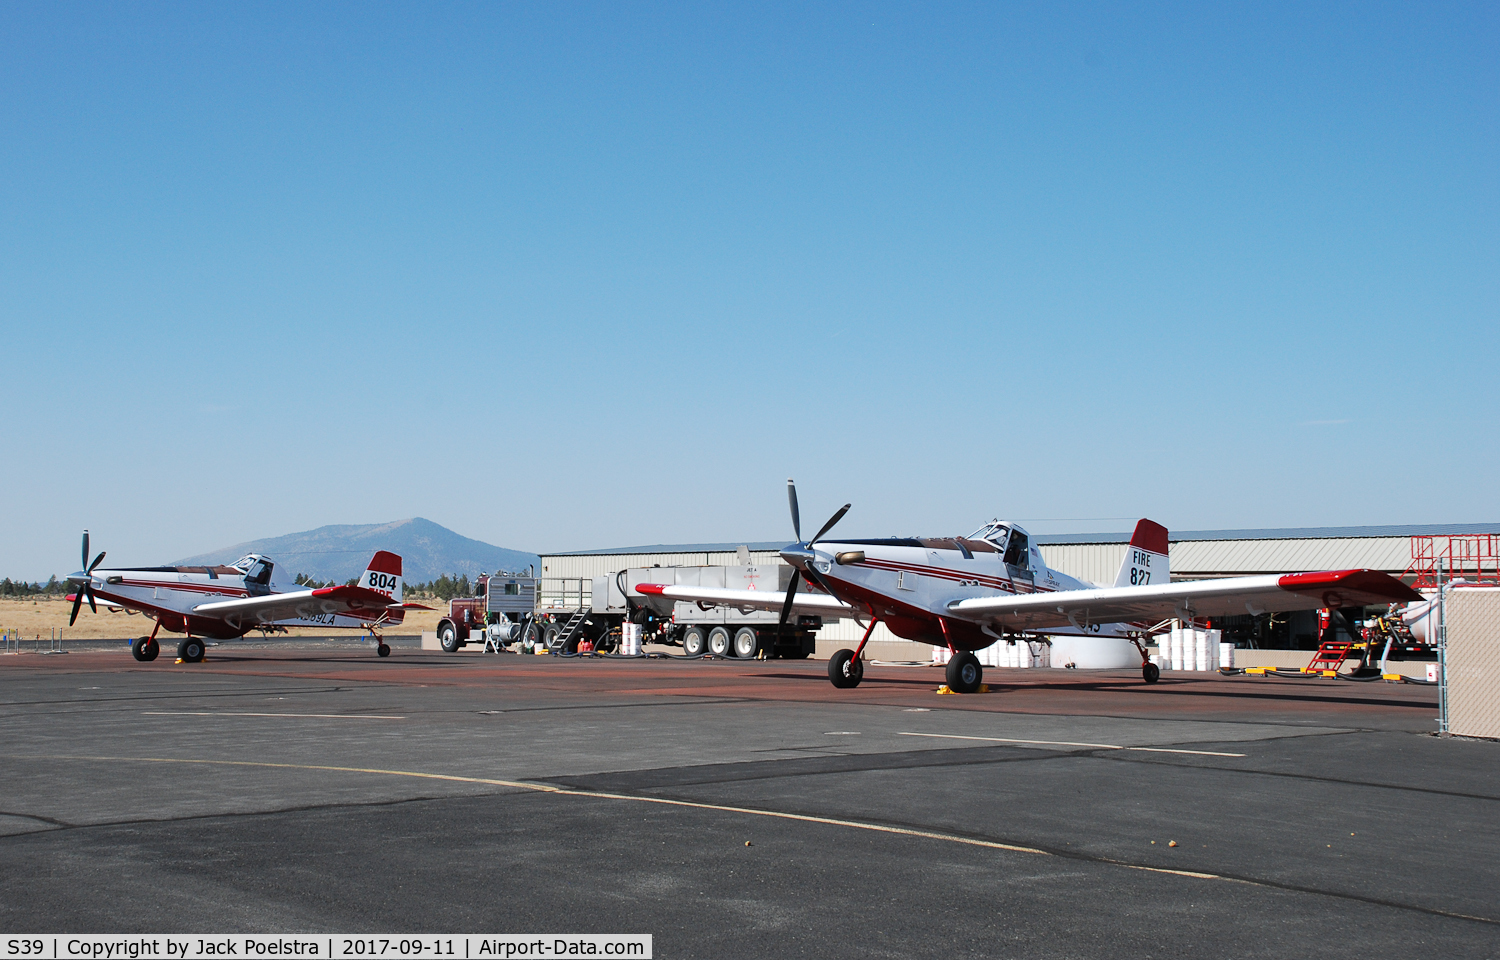 Prineville Airport (S39) - Air Tractors based at Prineville airport